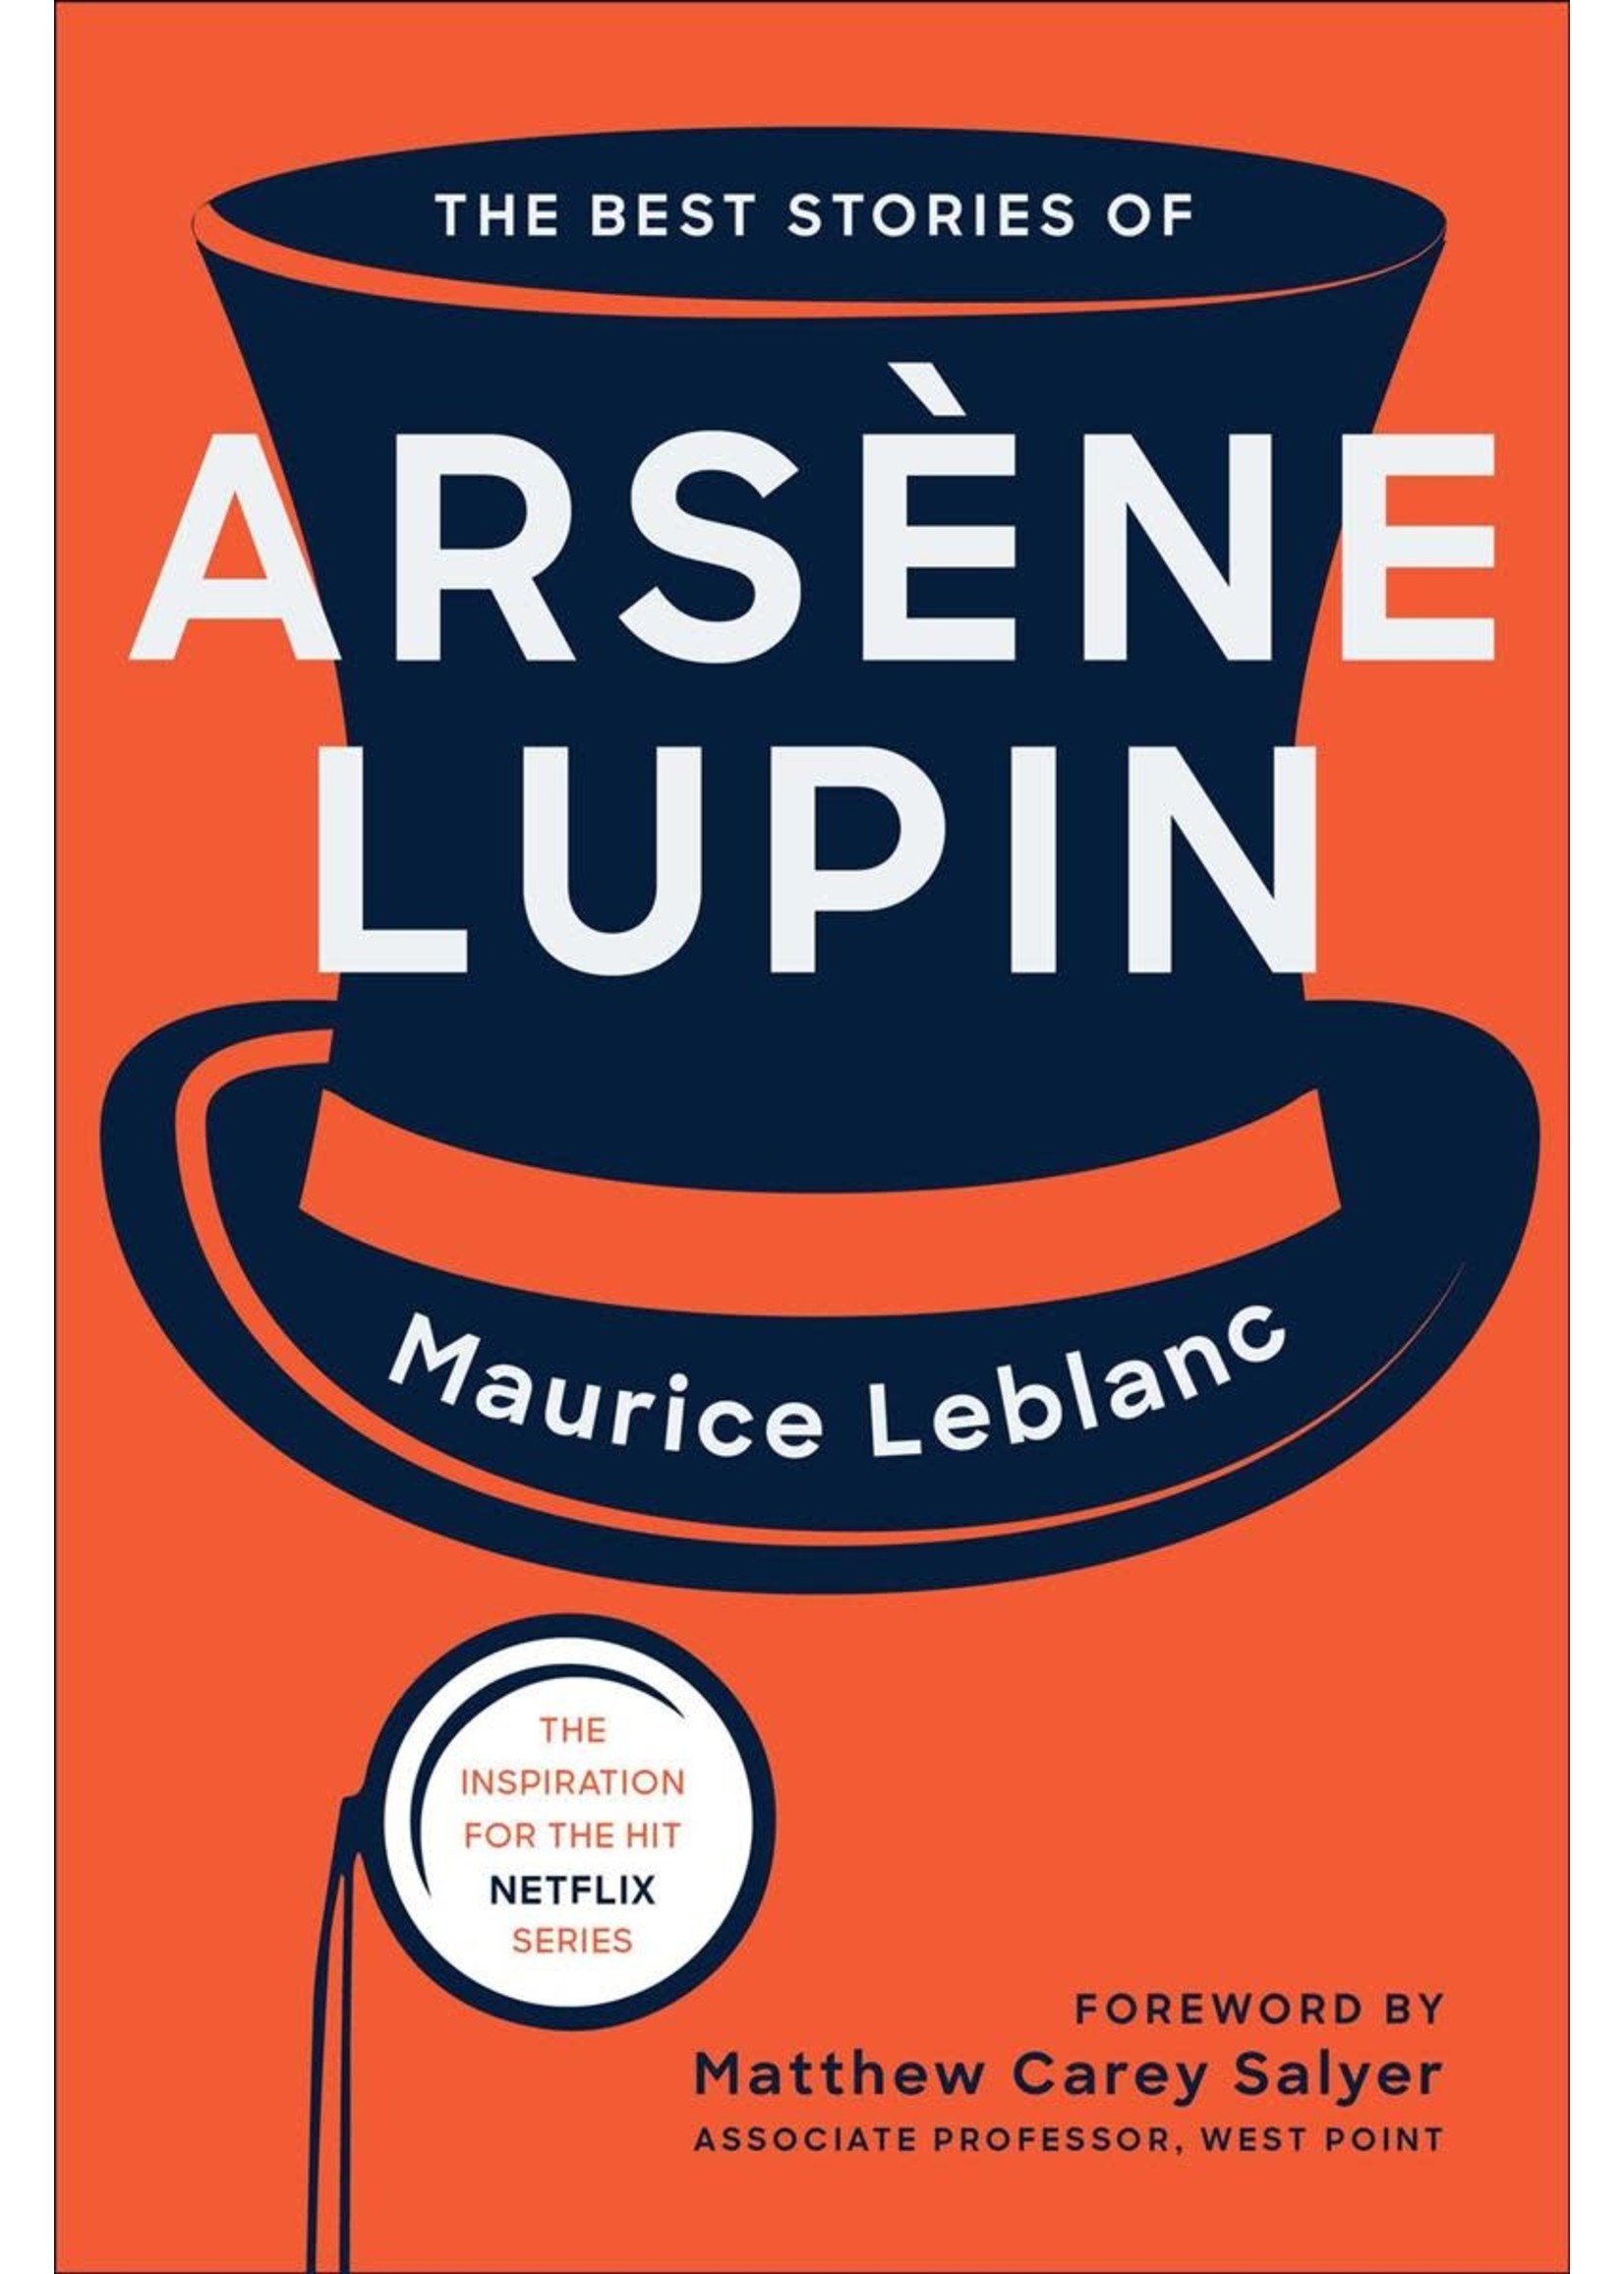 The Best Stories of Arsène Lupin by Maurice Leblanc